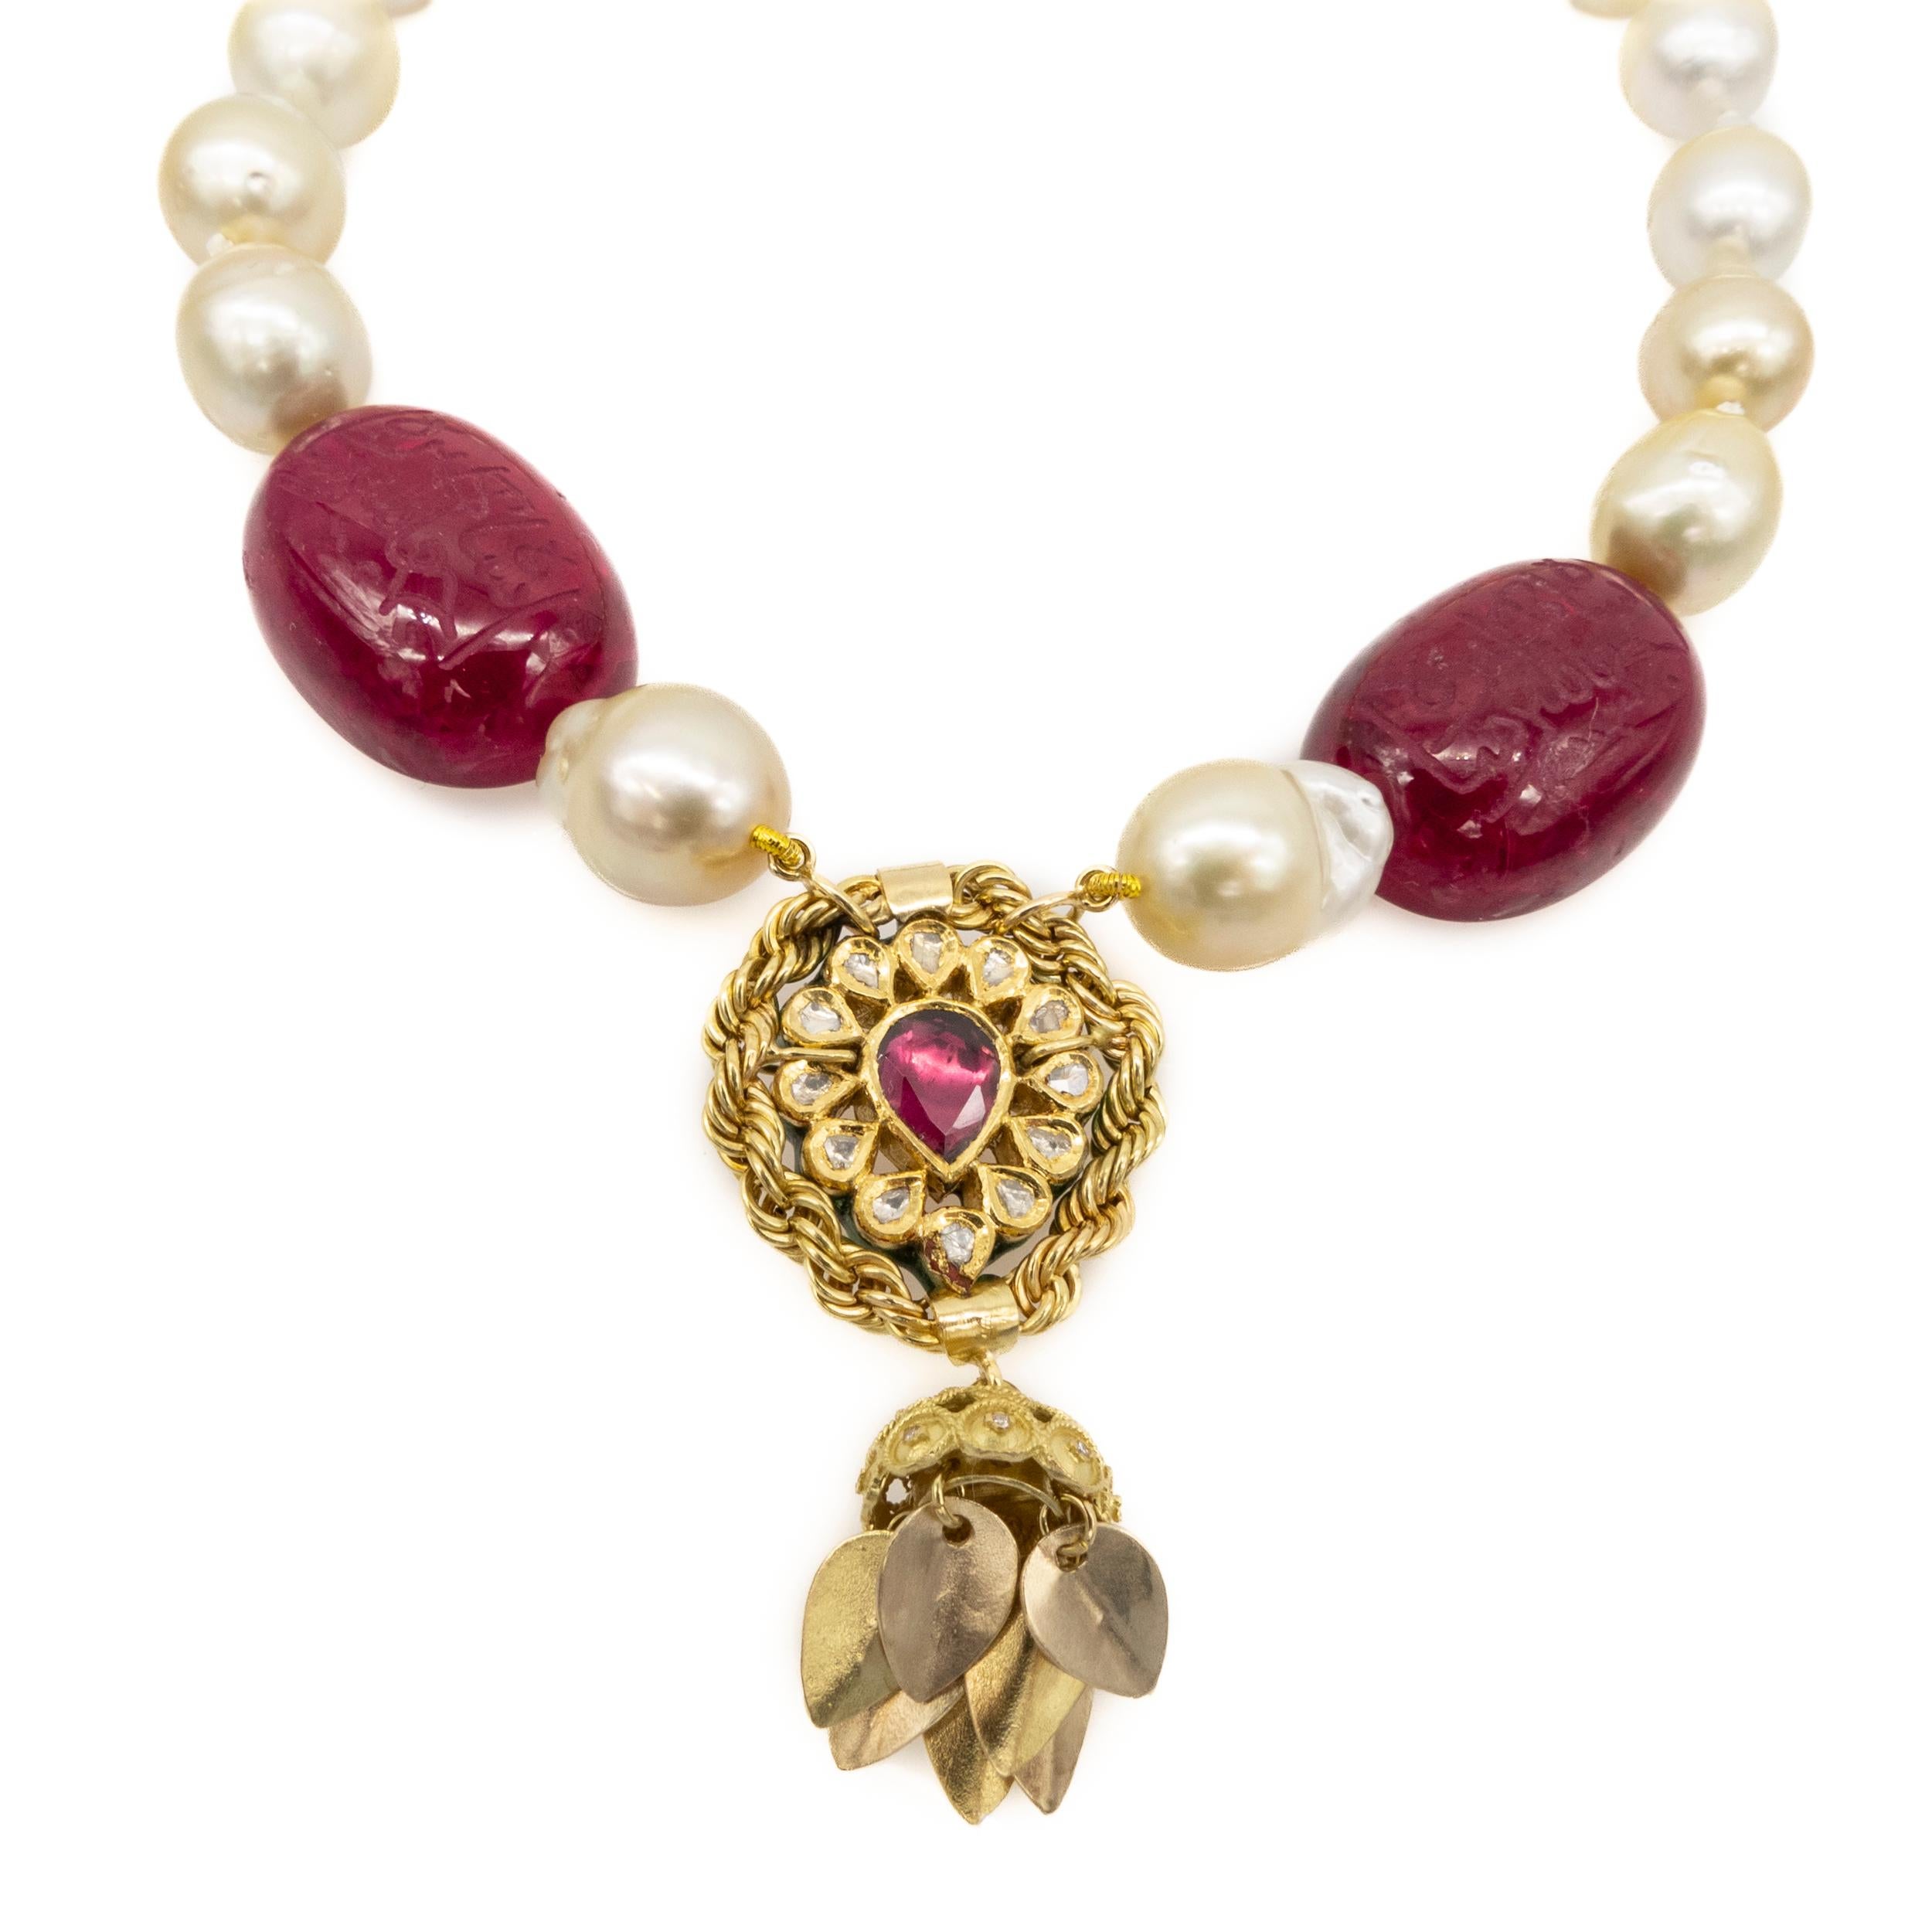 Necklace 18 Karat Gold Rubellite Natural Pearl Diamonds Enamel

Necklace in 18k yellow gold, natural pearls, reconstituted rubellites engraved with Arabic calligraphy glyptic and antique Mughal gold piece.

Introducing our stunning 18 karat yellow